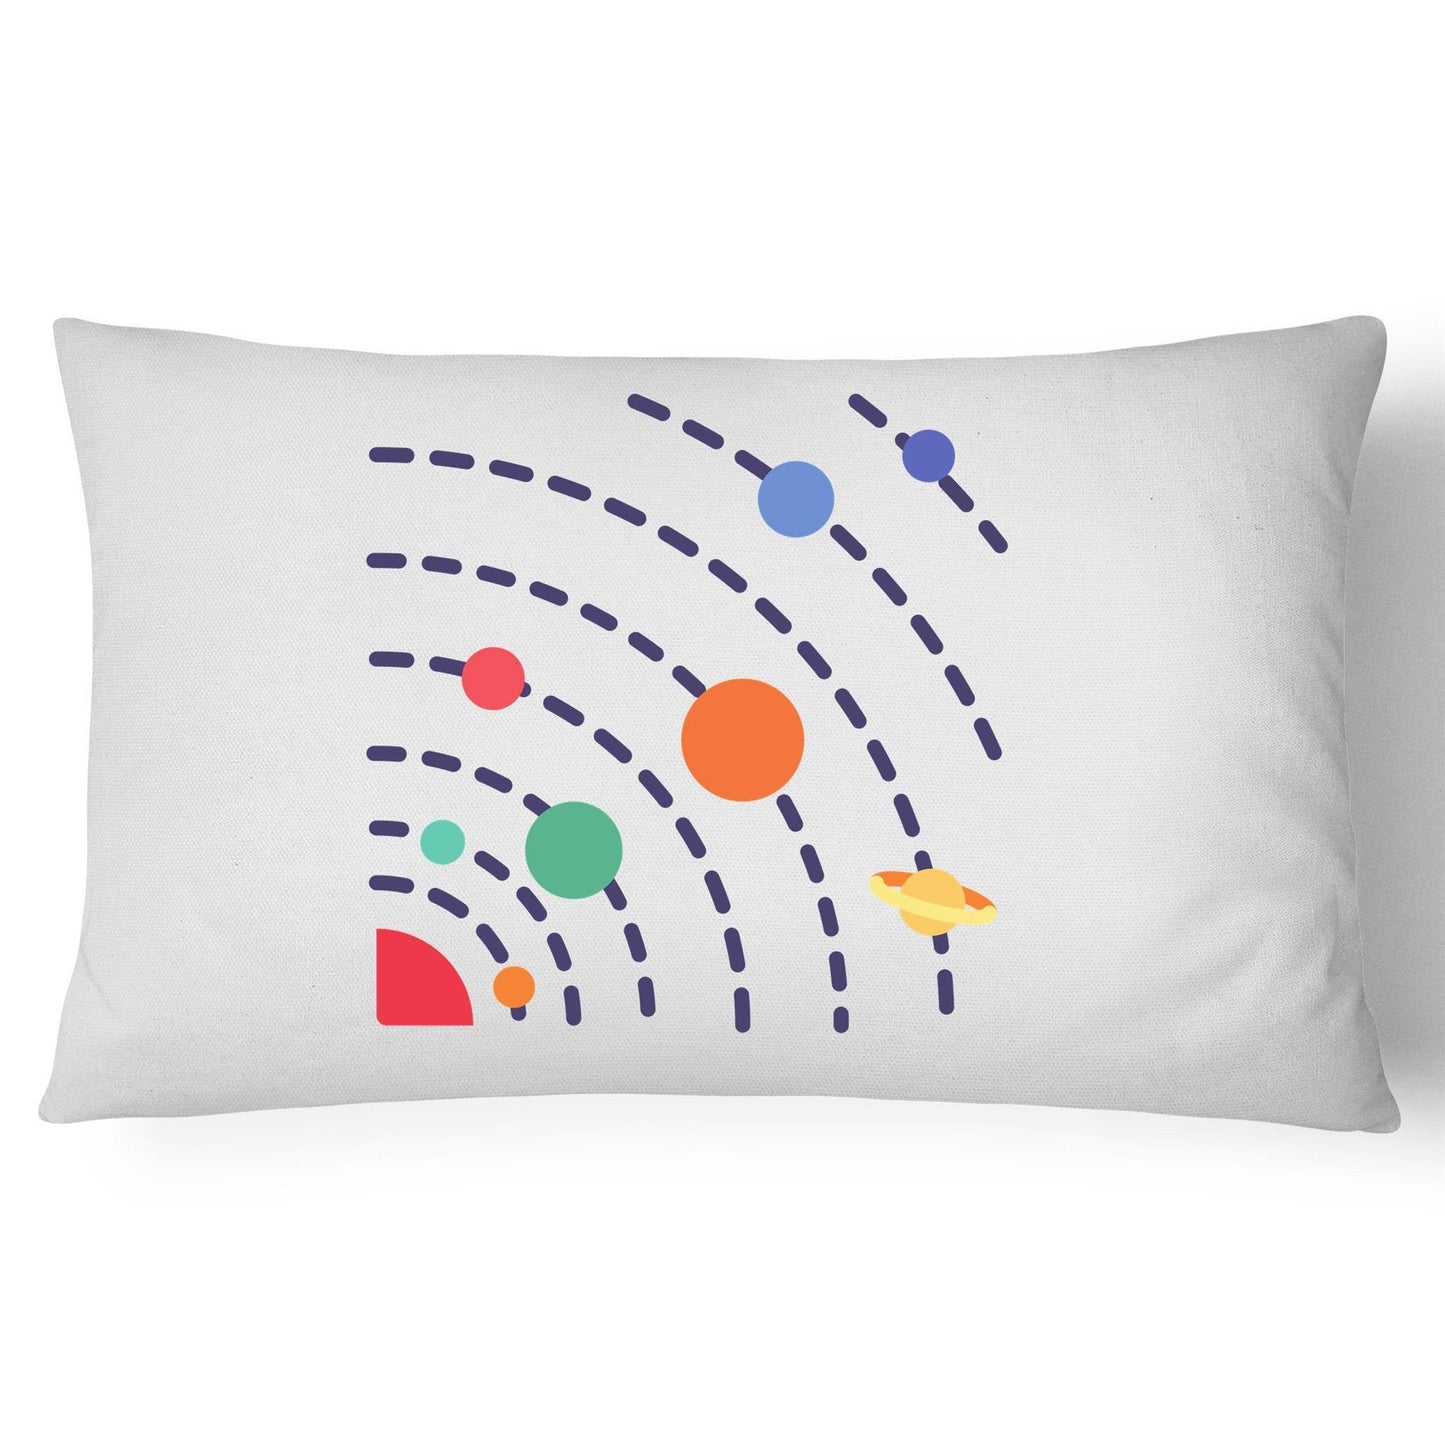 Solar System - 100% Cotton Pillow Case White One-Size Pillow Case kids Sci Fi Science Space